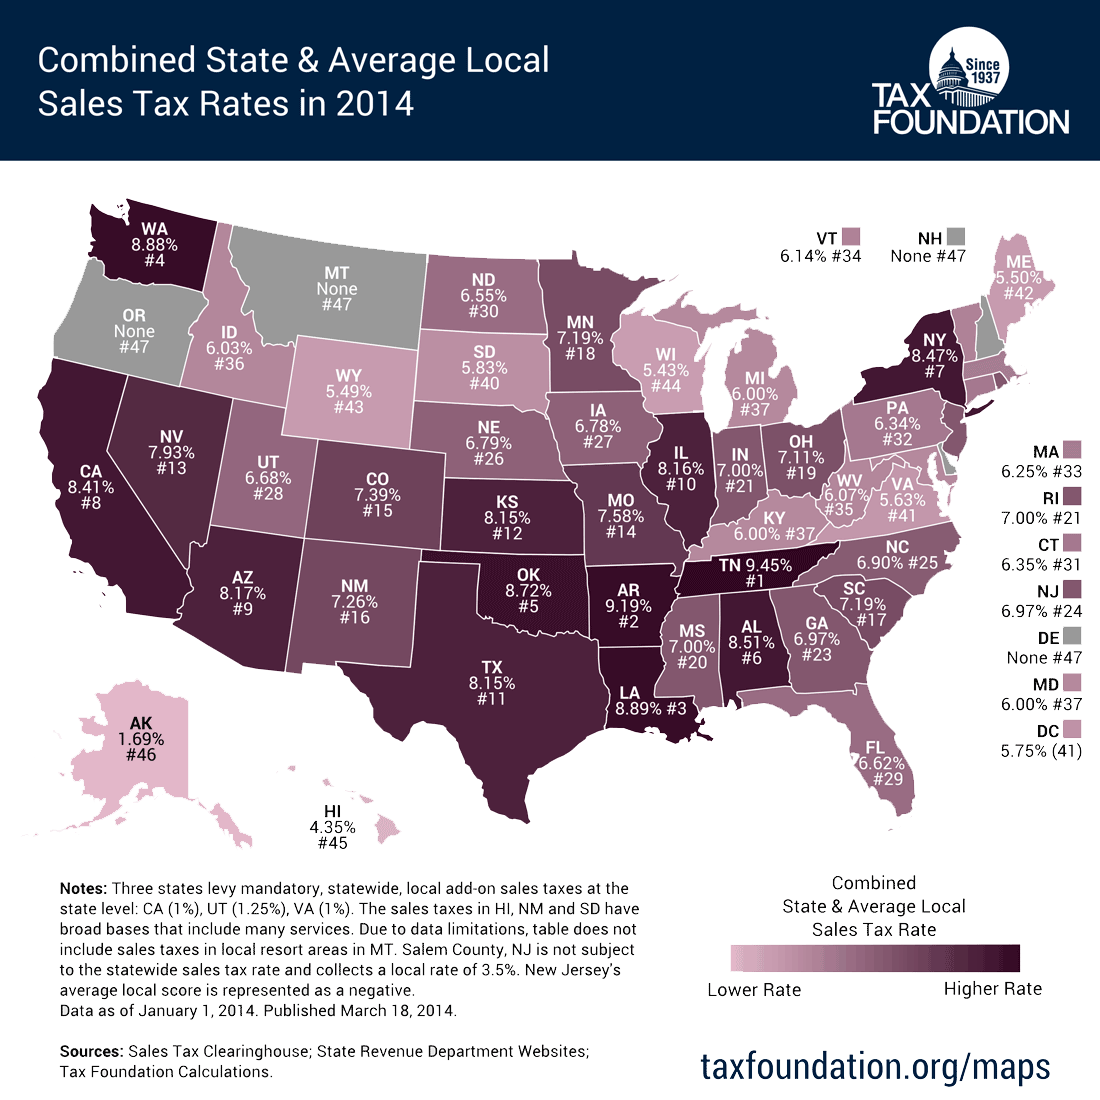 state-local-sales-taxes-2014-(large)kopie